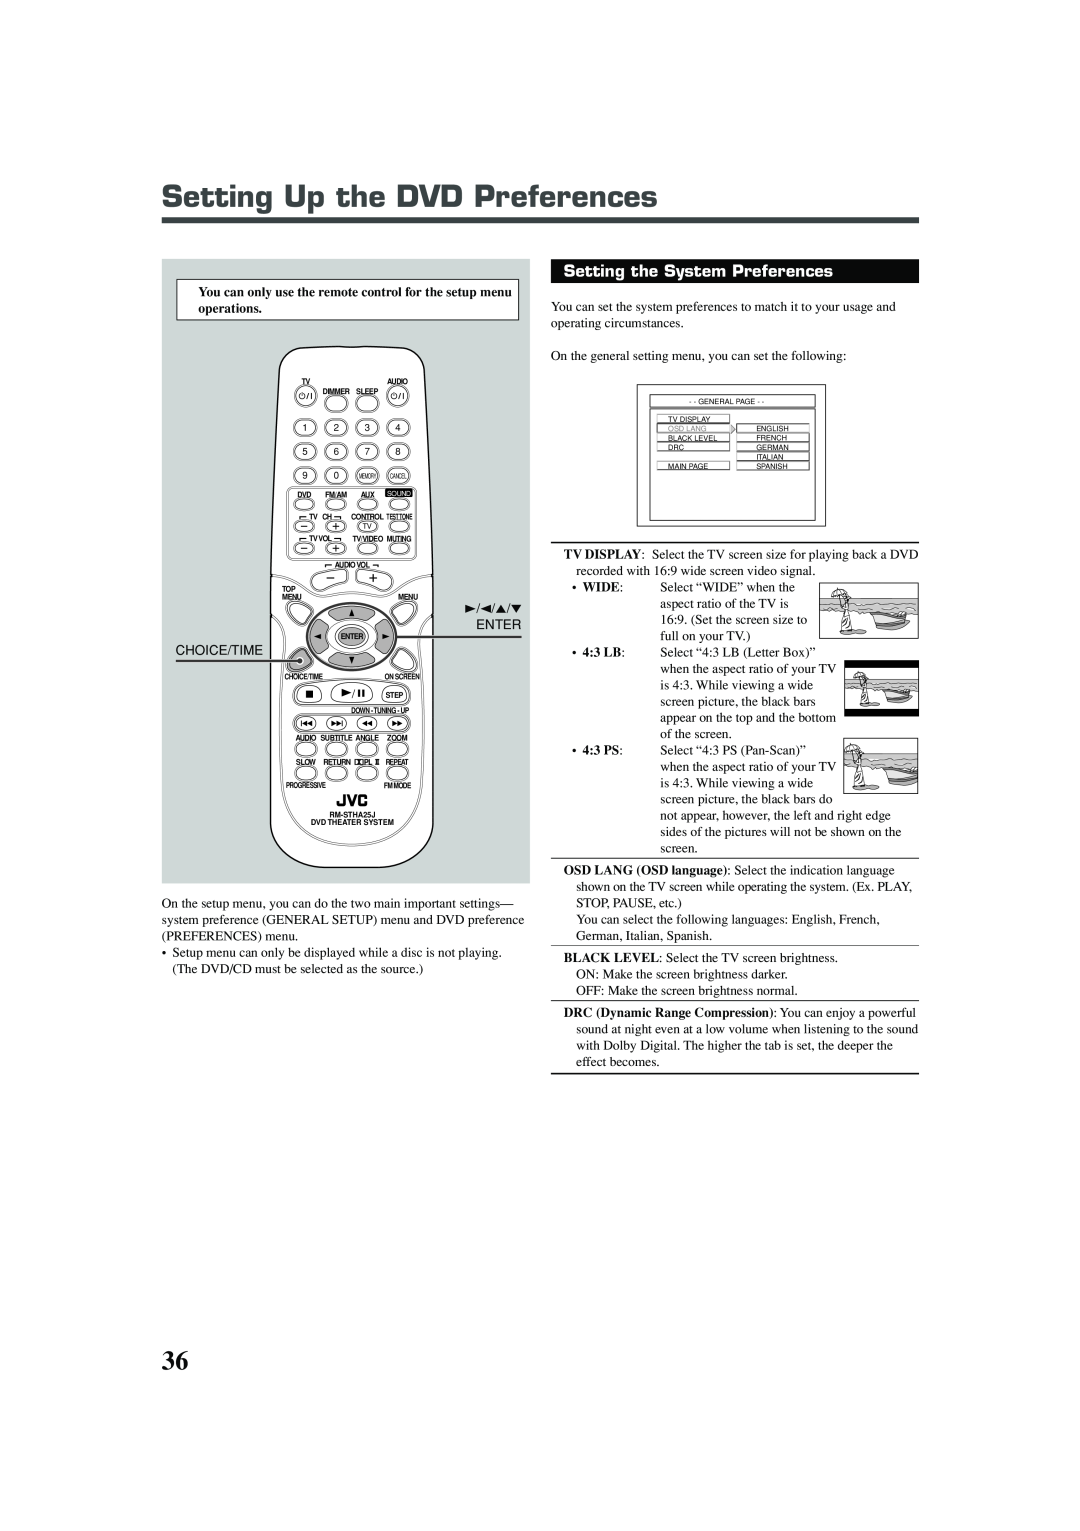 JVC TH-A25 manual Setting Up the DVD Preferences, Setting the System Preferences, Enter, Choice/Time 